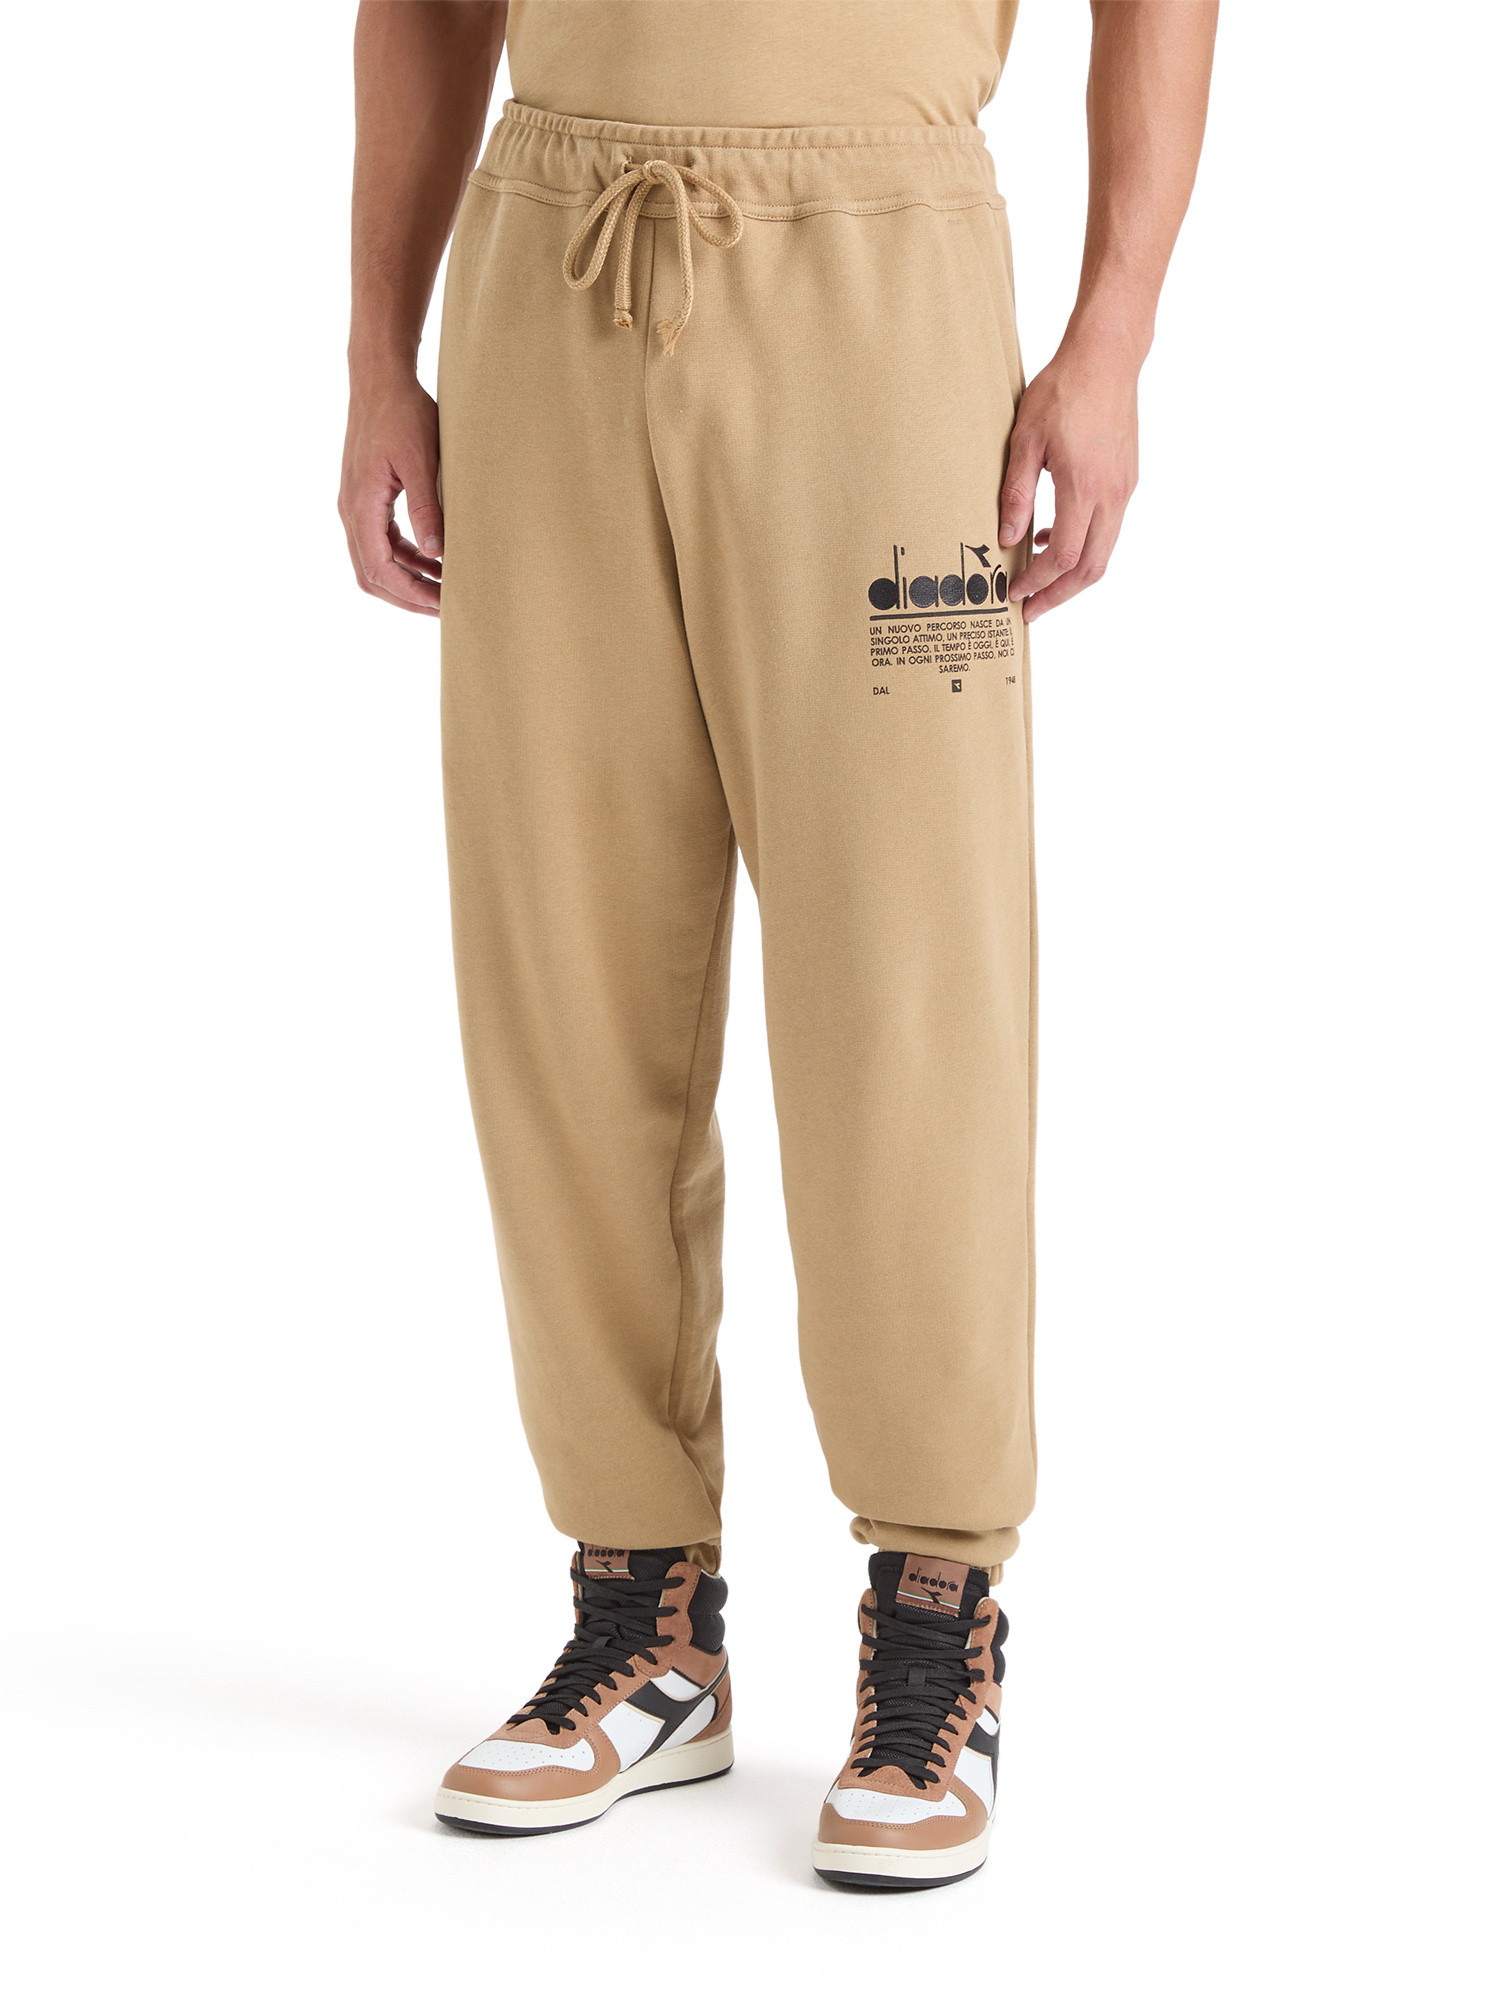 Diadora - Manifesto sports trousers with cotton print, Beige, large image number 3